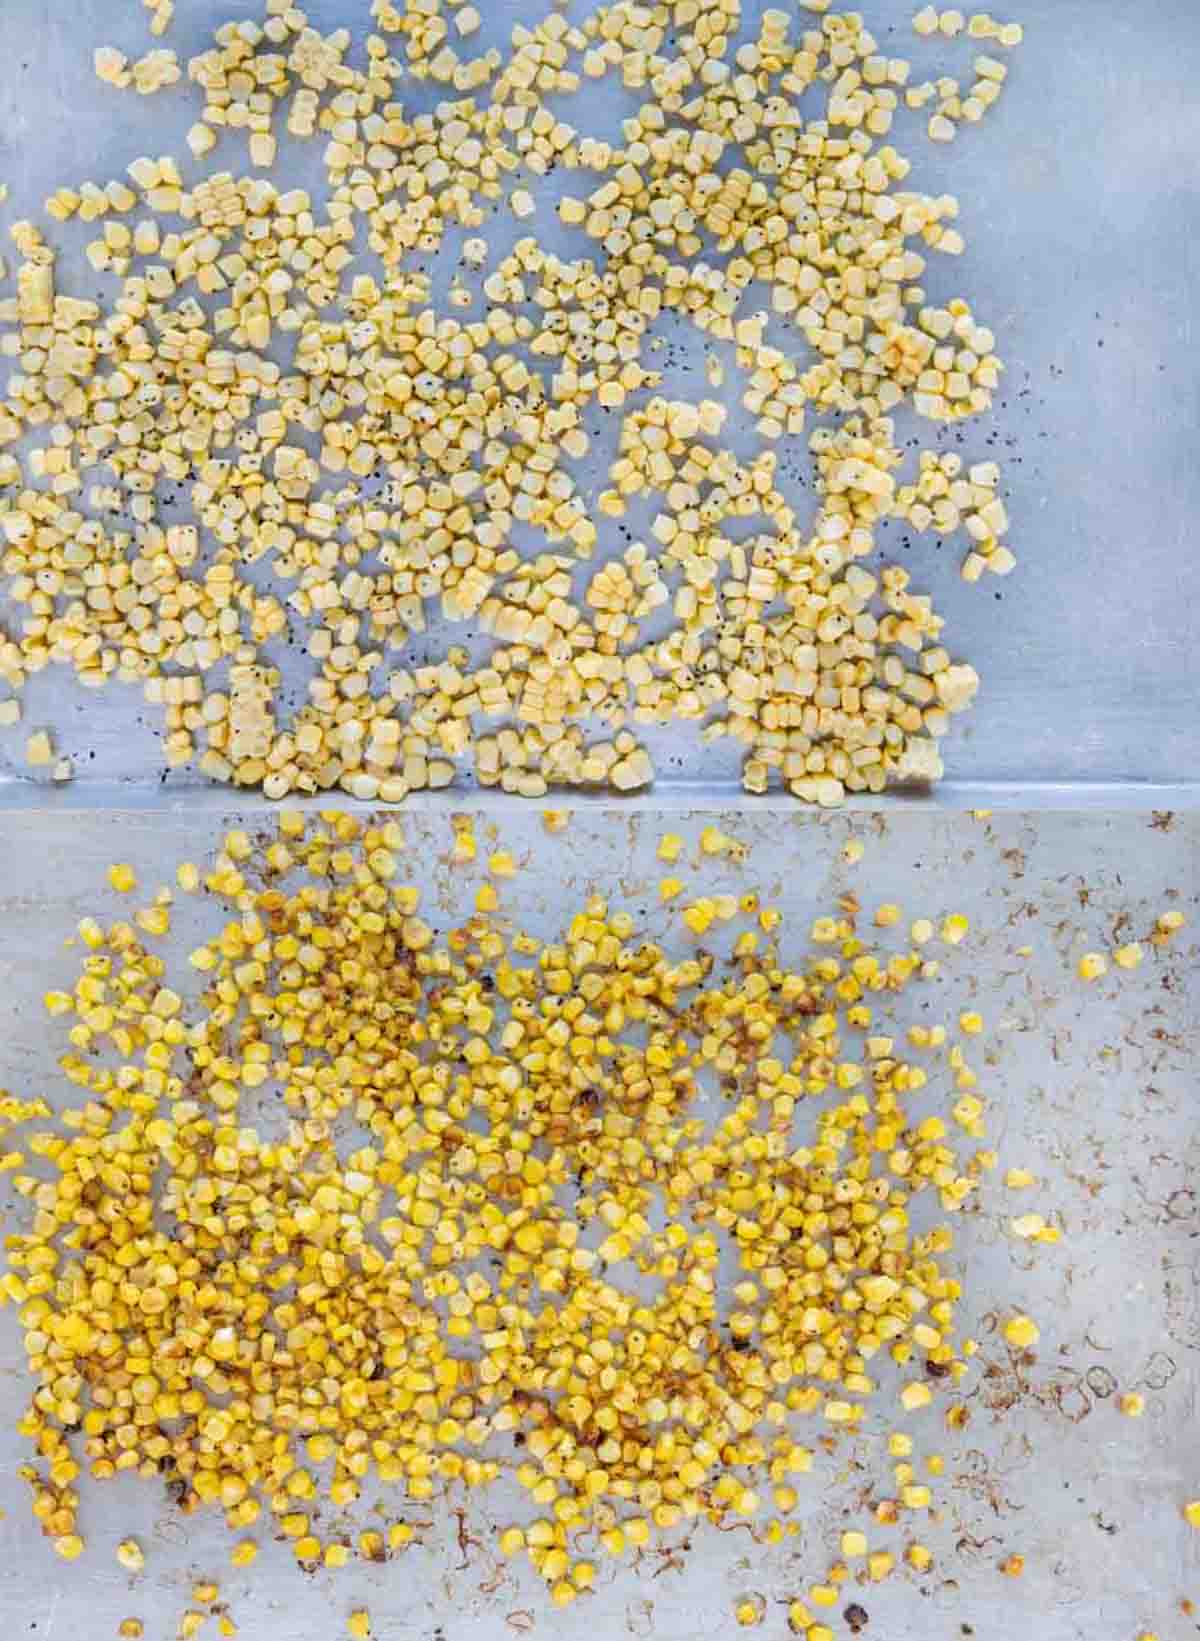 two images showing corn unroasted and roasted